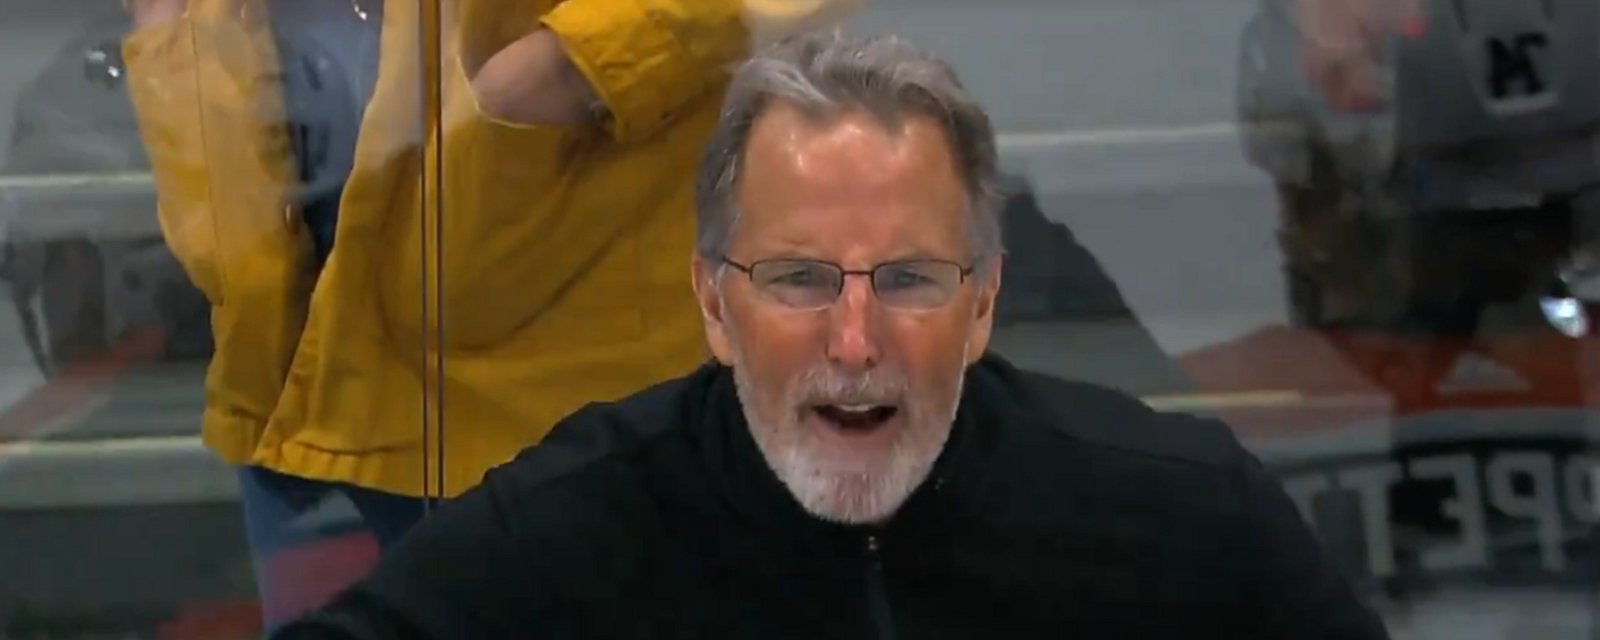 Rumor: Tortorella in trouble after outburst on Saturday.